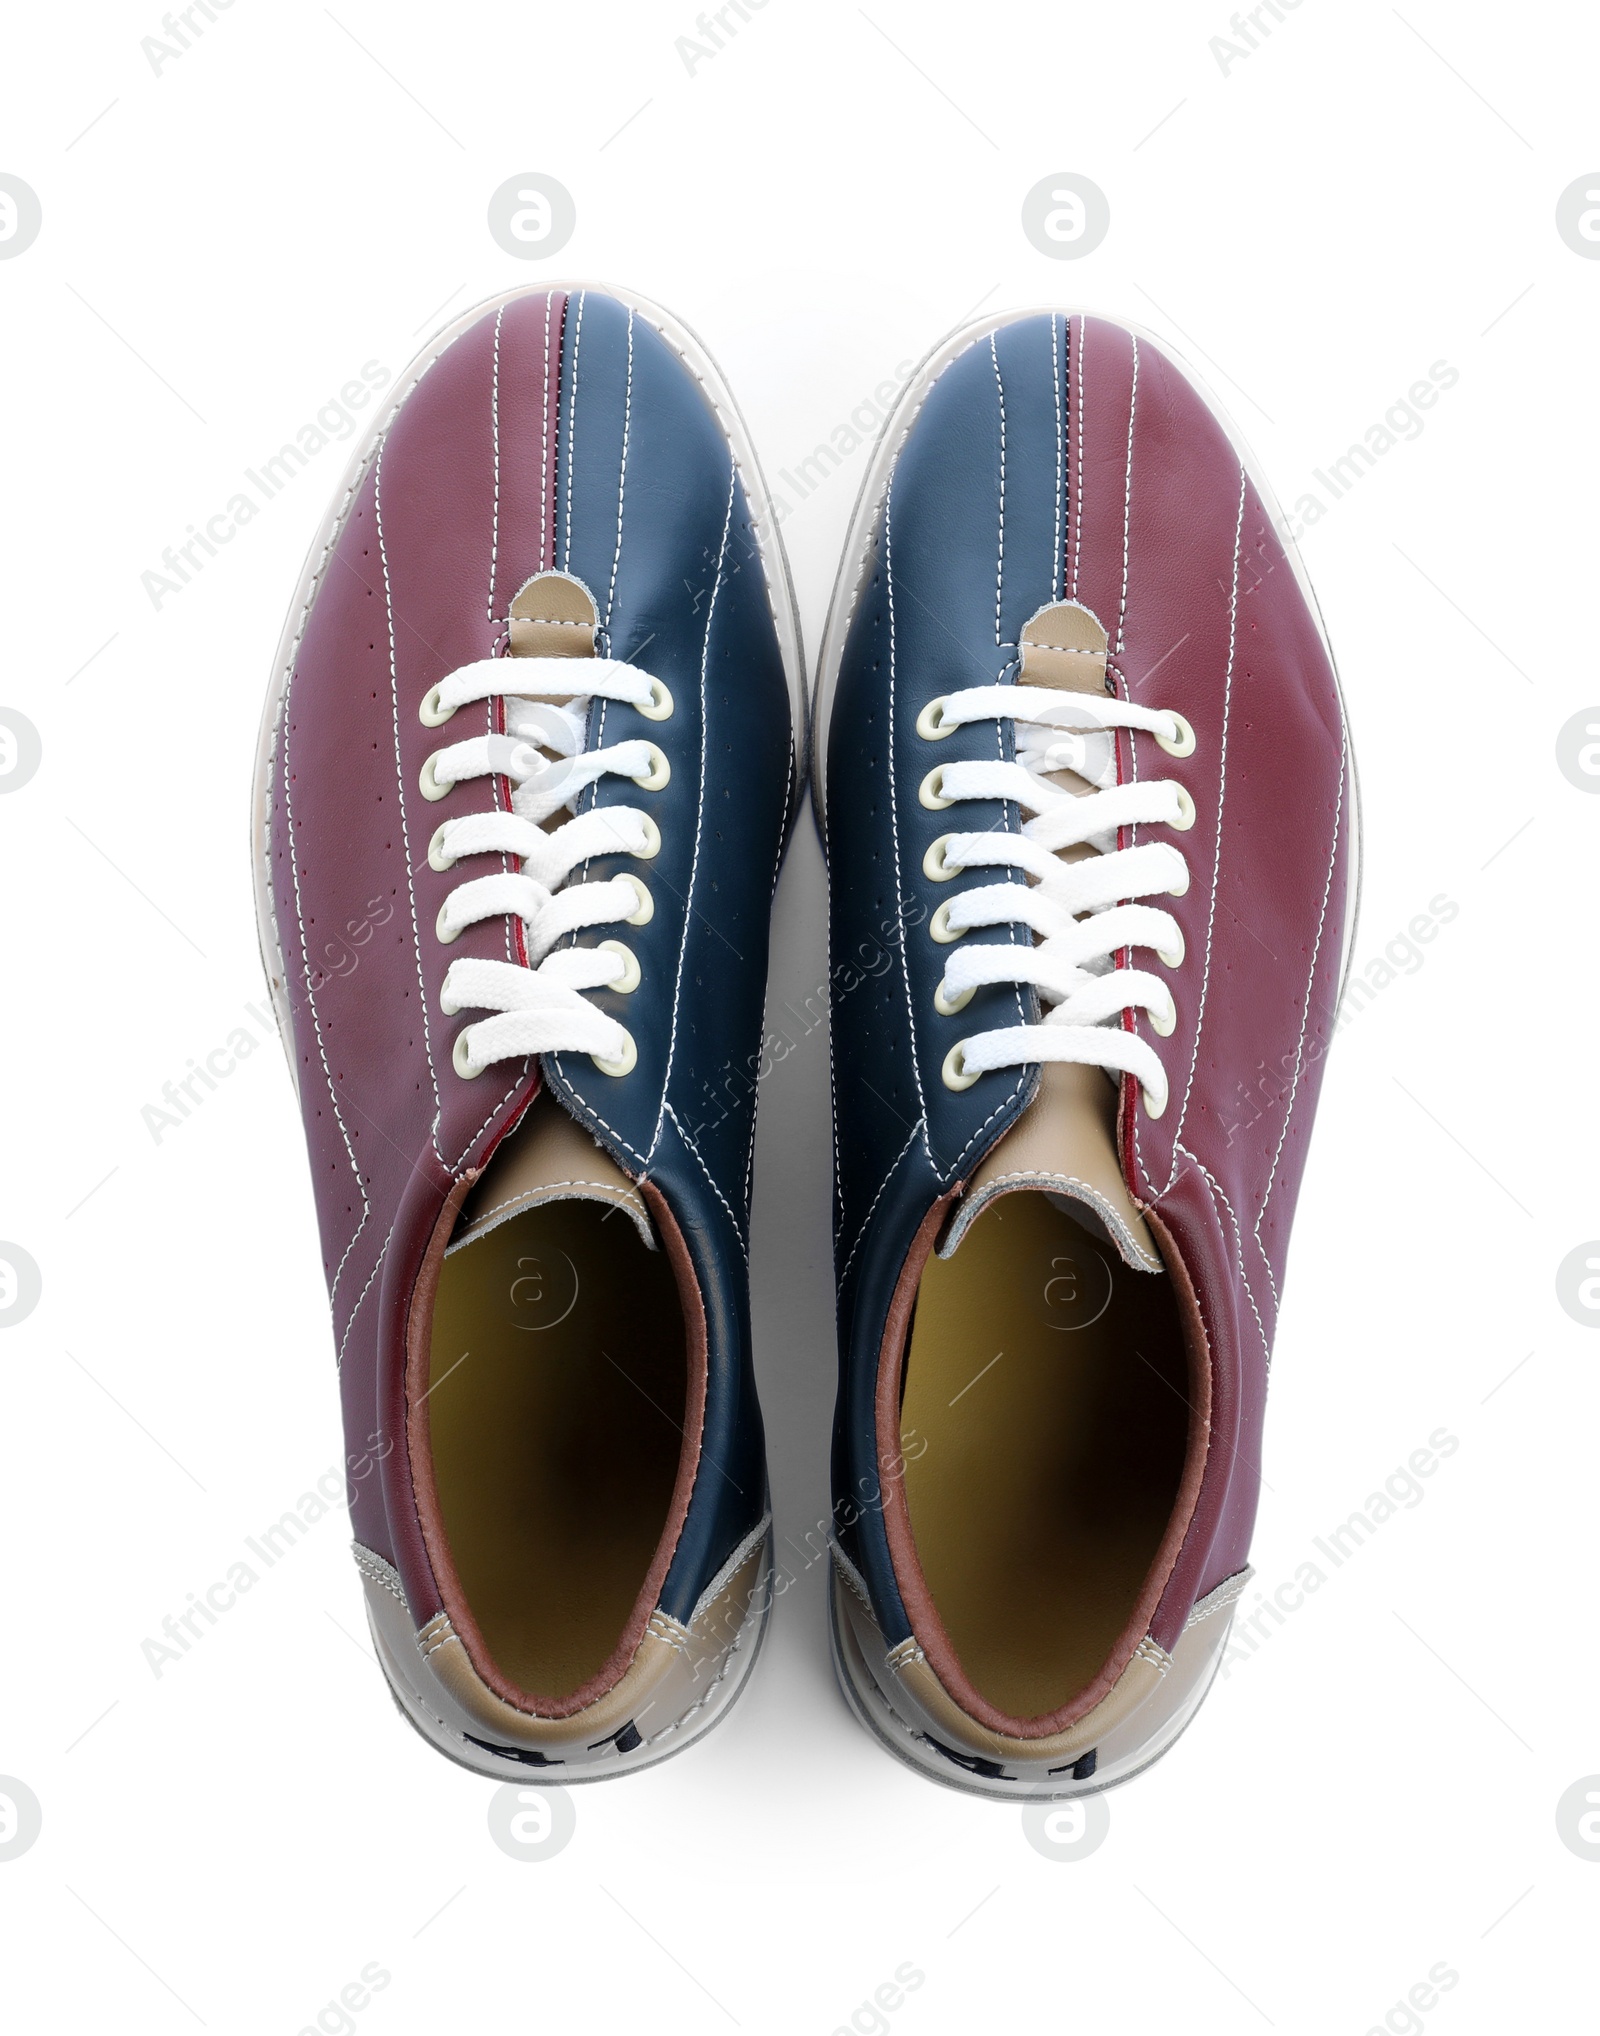 Photo of Pair of bowling shoes isolated on white, top view